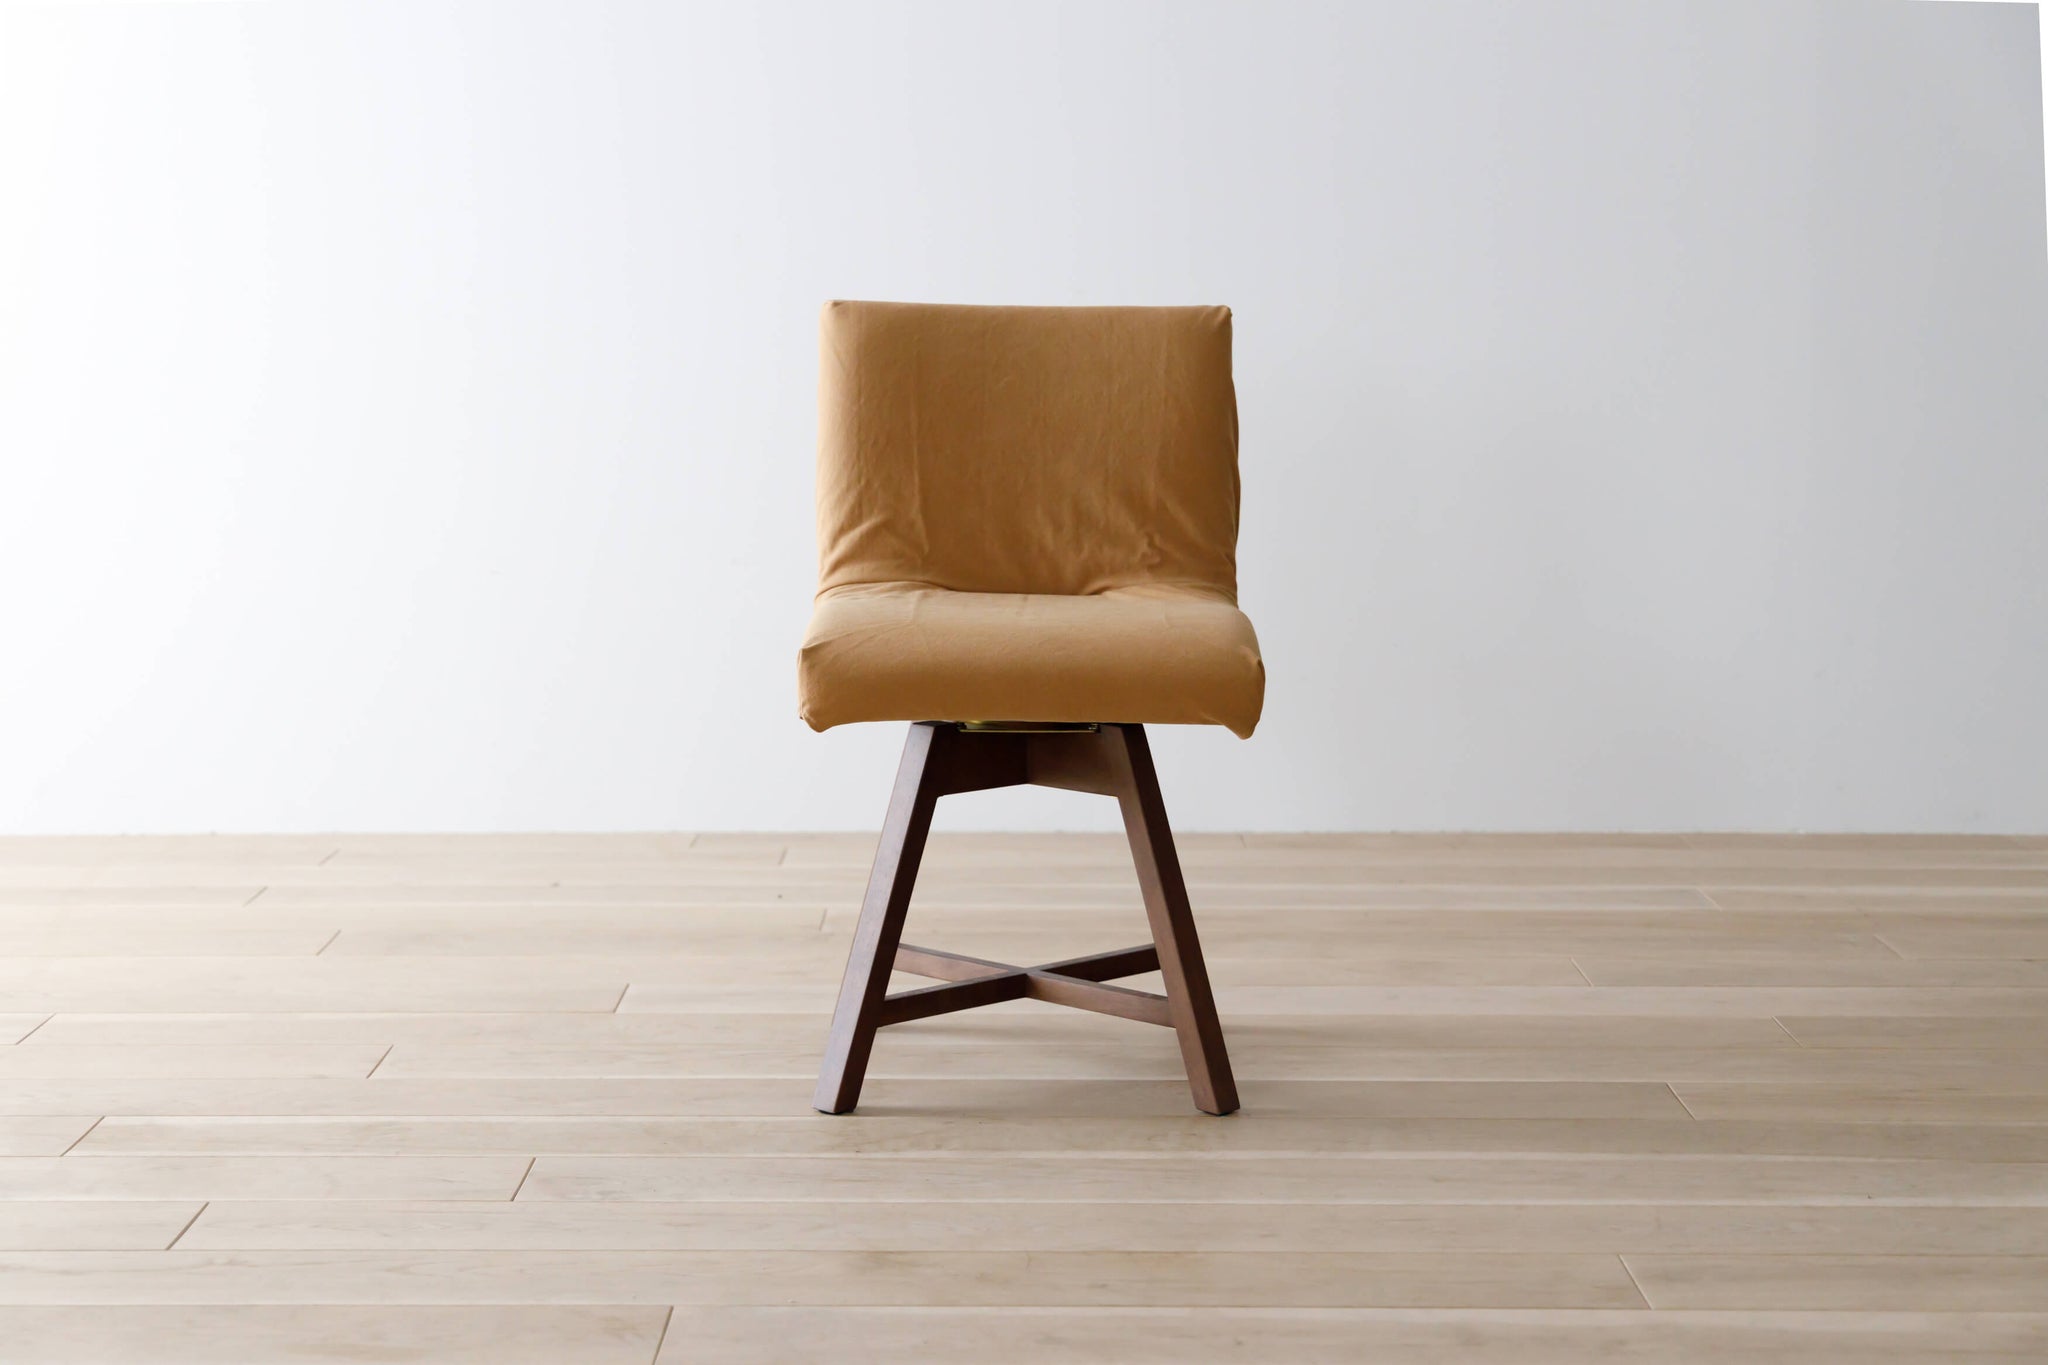 TOCCO round chair 旋轉餐椅 